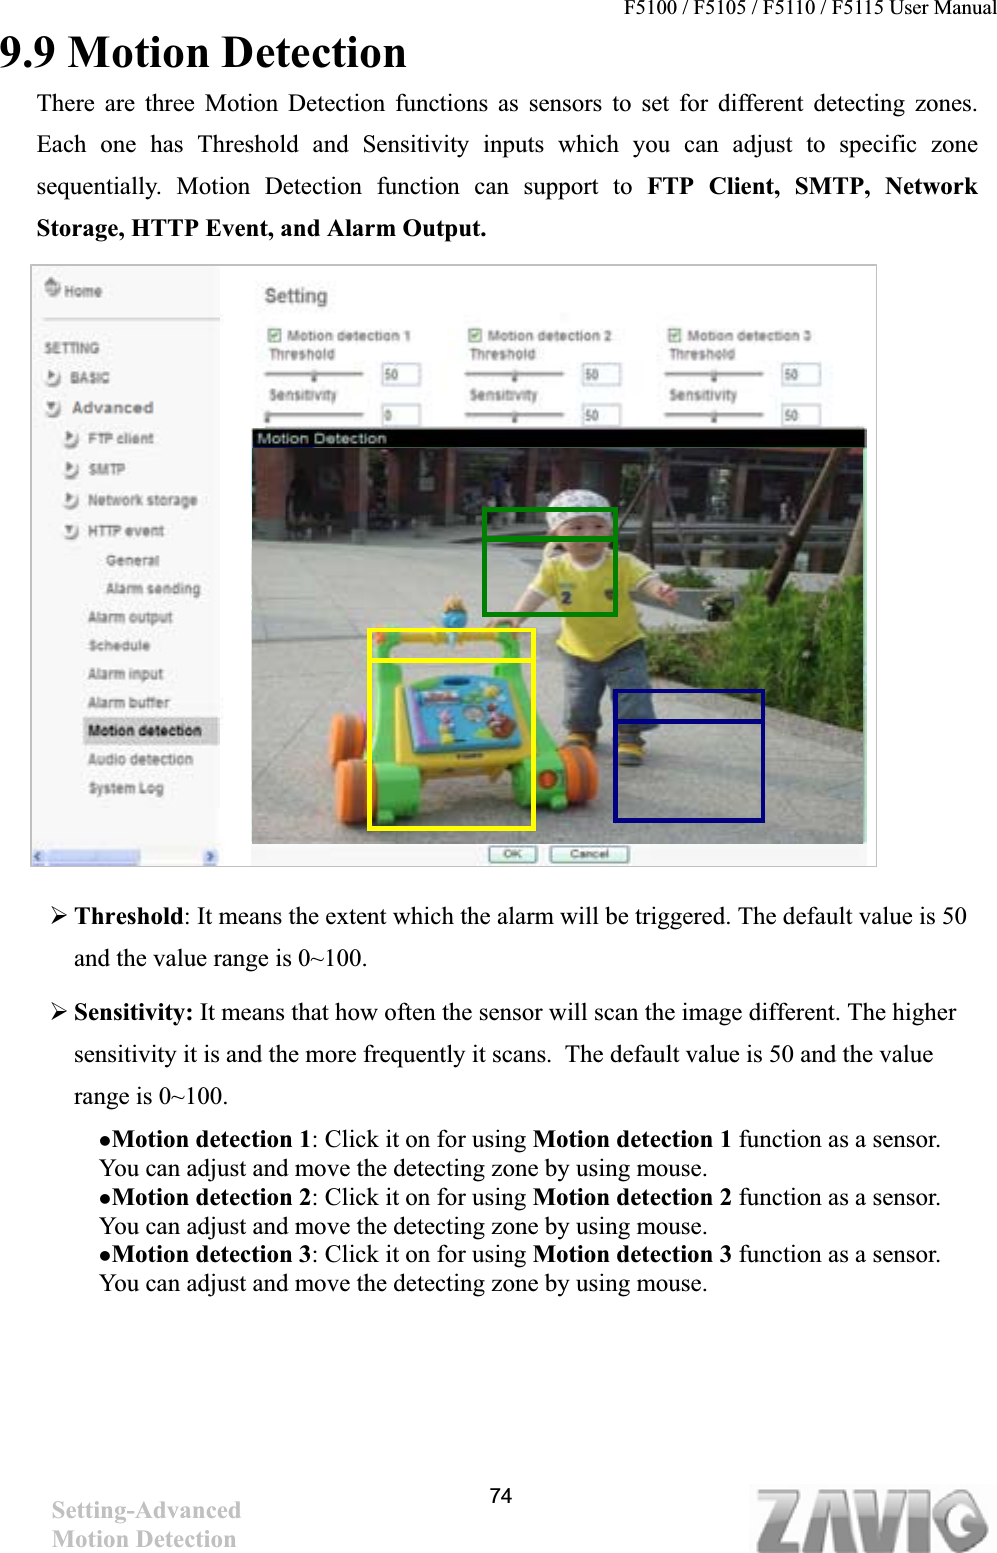 F5100 / F5105 / F5110 / F5115 User Manual                                                                           9.9 Motion Detection There are three Motion Detection functions as sensors to set for different detecting zones. Each one has Threshold and Sensitivity inputs which you can adjust to specific zone sequentially. Motion Detection function can support to FTP Client, SMTP, Network Storage, HTTP Event, and Alarm Output.¾Threshold: It means the extent which the alarm will be triggered. The default value is 50 and the value range is 0~100.   ¾Sensitivity: It means that how often the sensor will scan the image different. The higher sensitivity it is and the more frequently it scans.  The default value is 50 and the value range is 0~100.   zMotion detection 1: Click it on for using Motion detection 1 function as a sensor. You can adjust and move the detecting zone by using mouse.   zMotion detection 2: Click it on for using Motion detection 2 function as a sensor. You can adjust and move the detecting zone by using mouse.   zMotion detection 3: Click it on for using Motion detection 3 function as a sensor. You can adjust and move the detecting zone by using mouse. 74Setting-AdvancedMotion Detection 